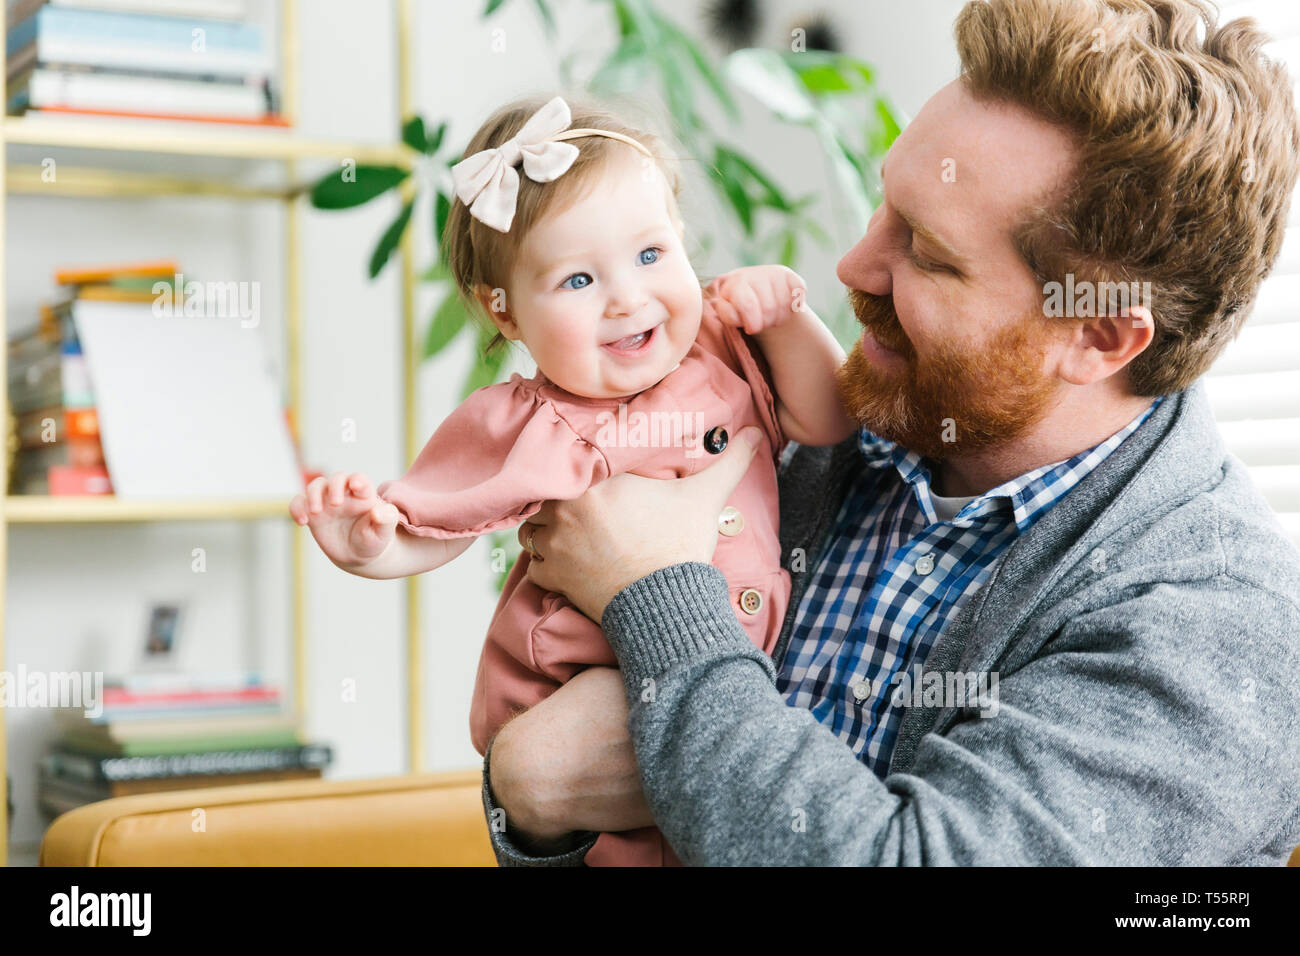 Smiling father holding his baby girl Stock Photo